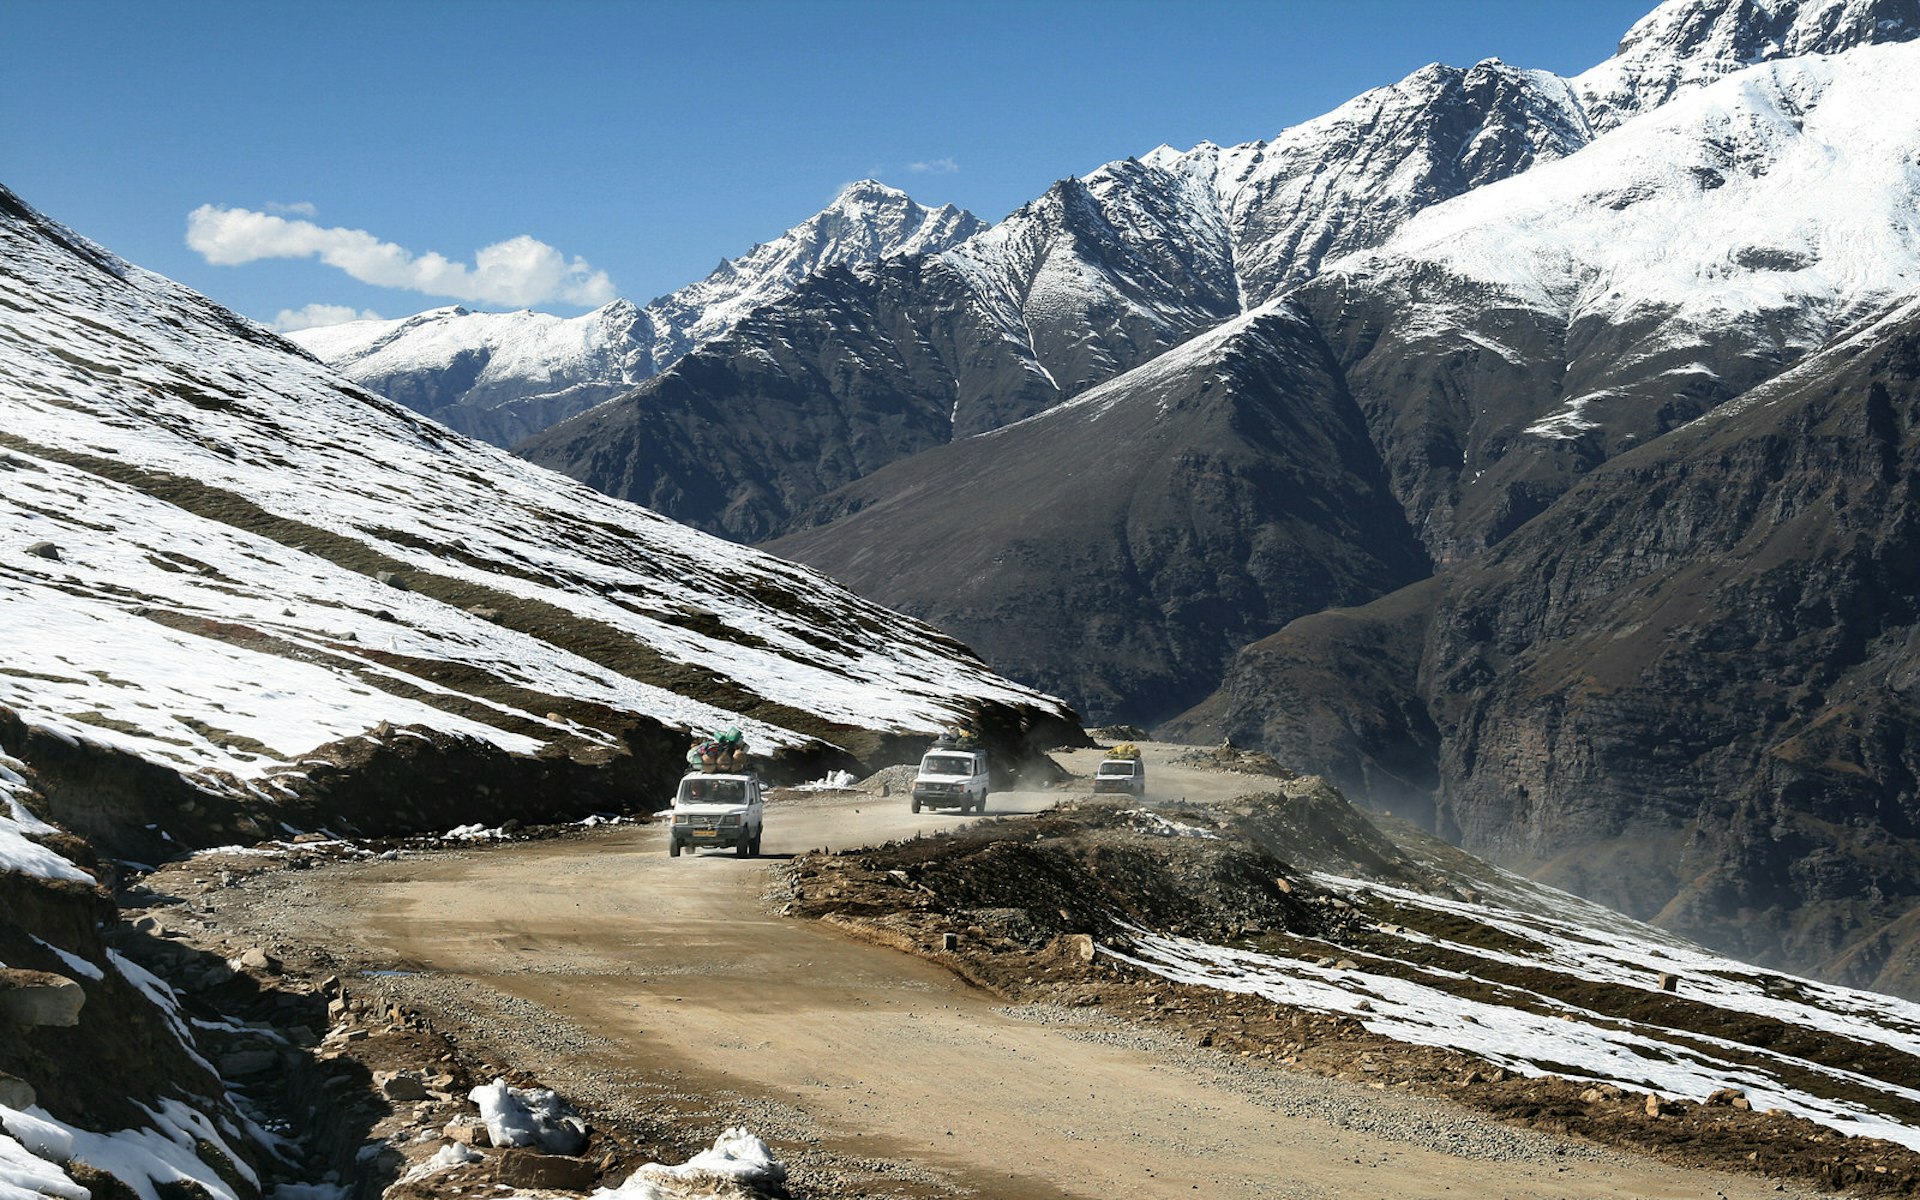 Jeeps passing through a desolate landscape in Himachal Pradesh